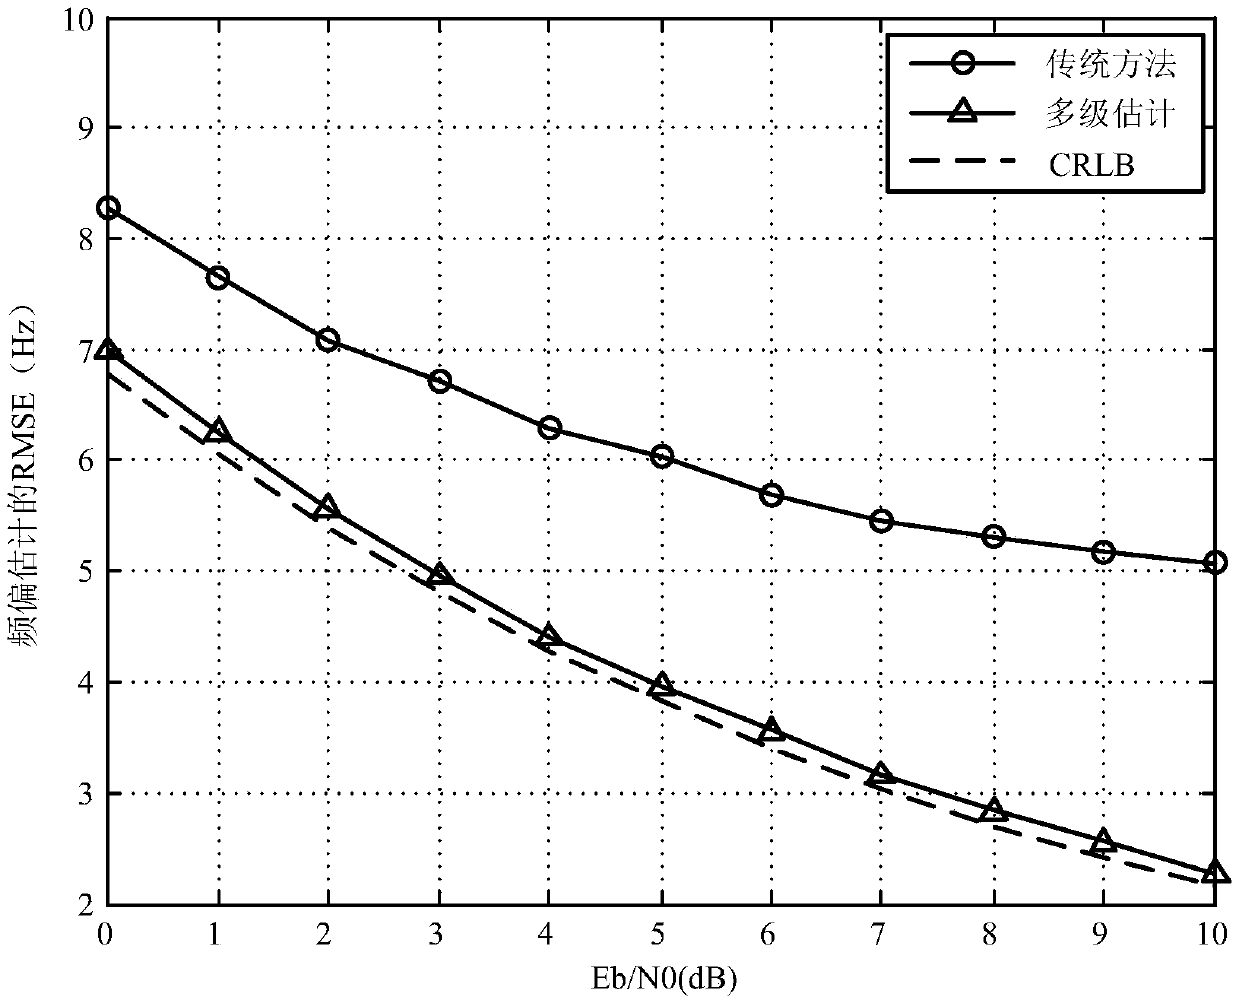 A Multi-stage Frequency Offset Estimation Method Based on fft